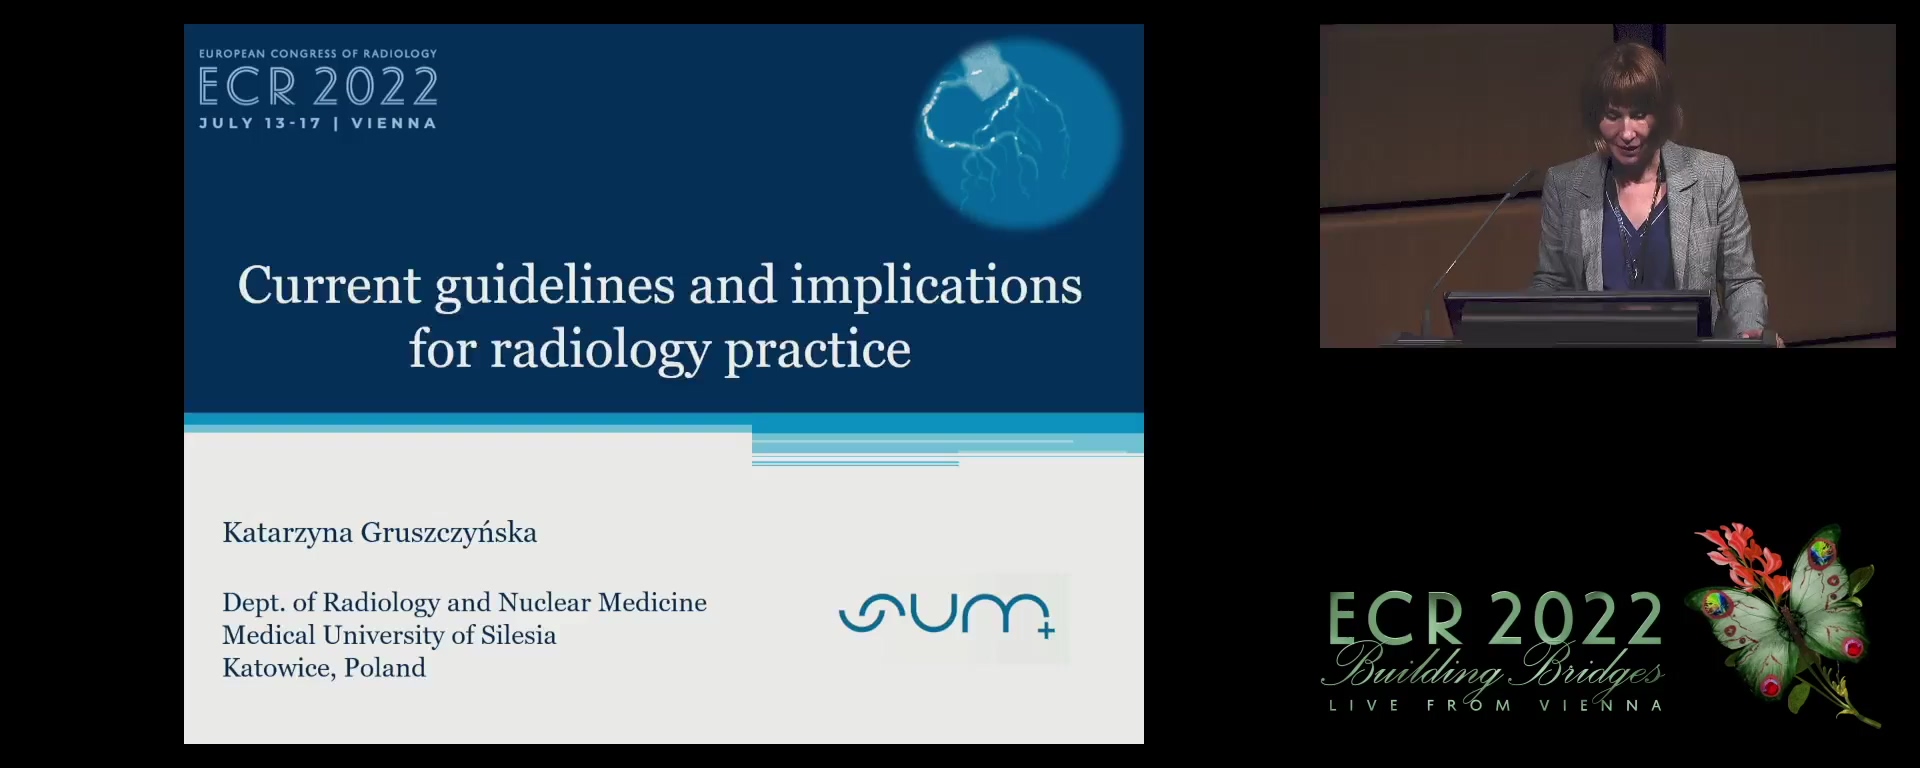 Current guidelines and implications for radiology practice - Katarzyna Gruszczynska, Katowice / PL